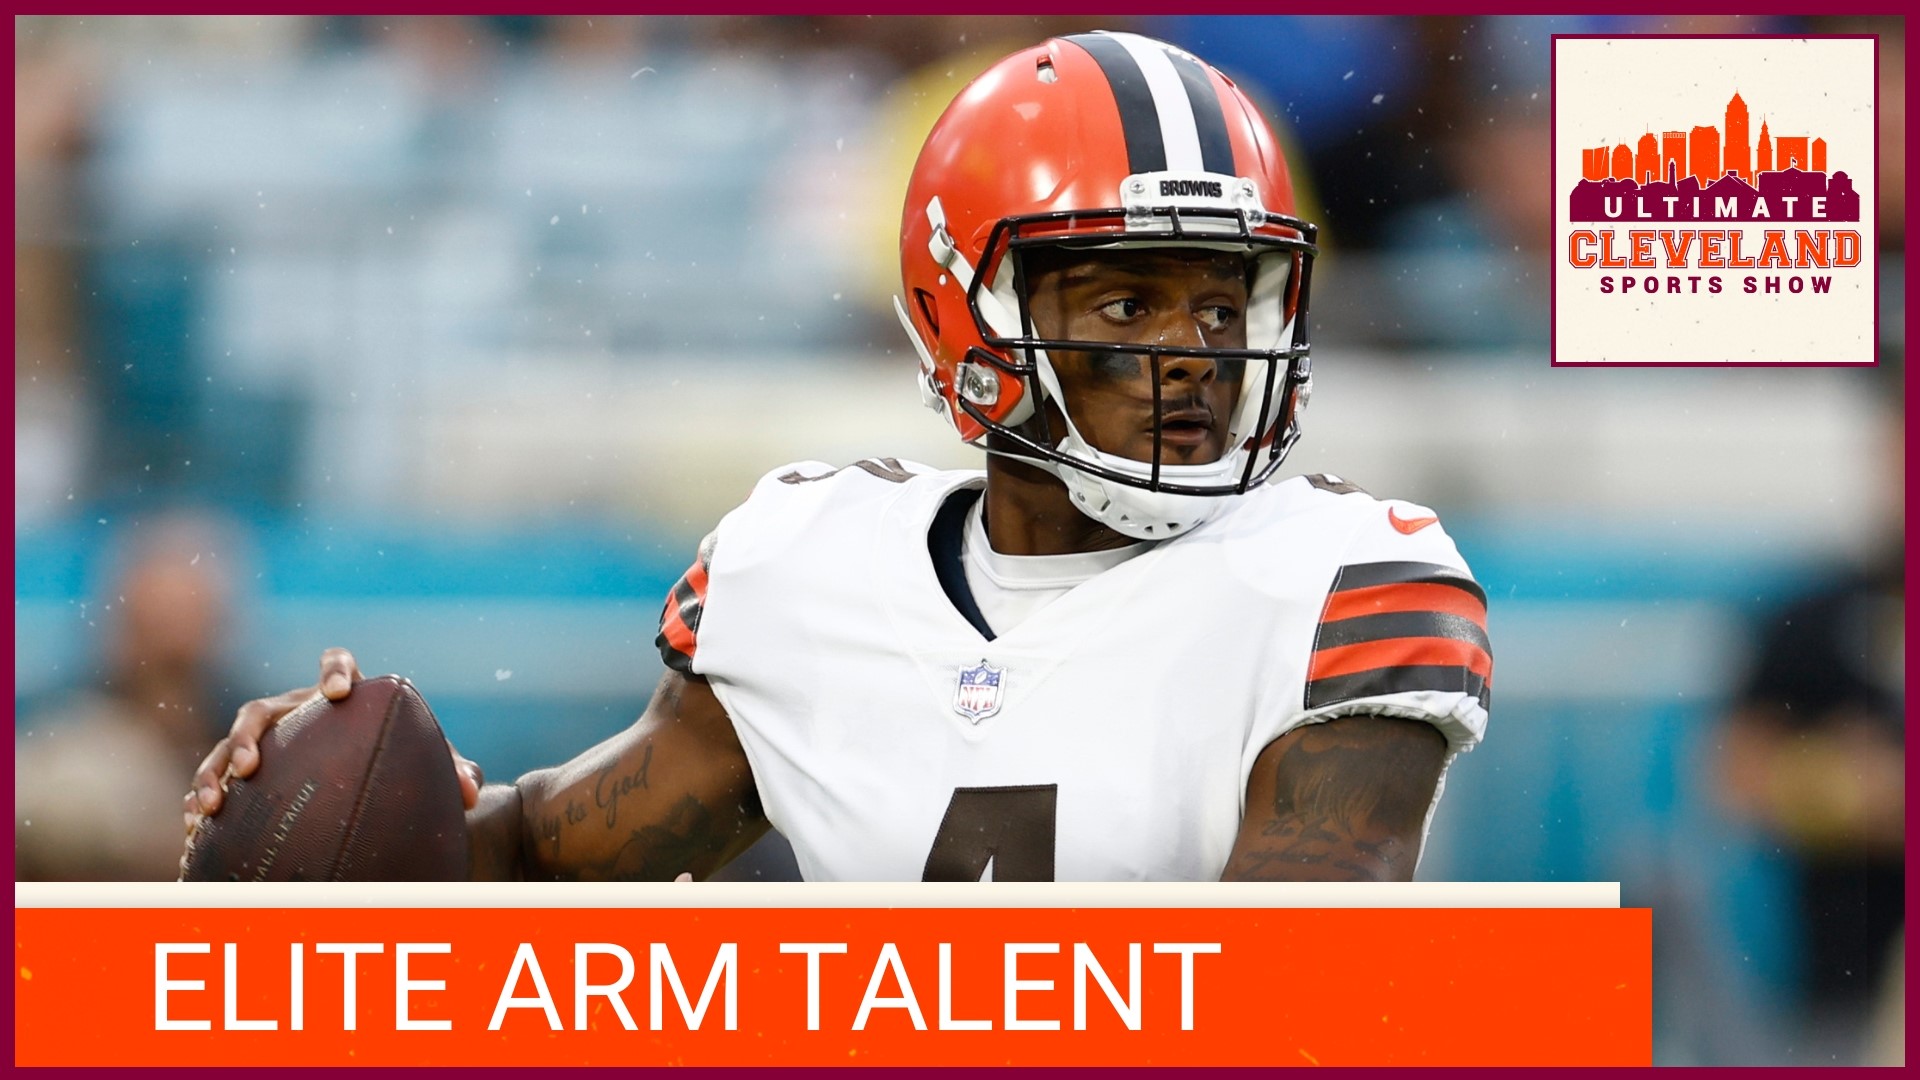 Does Cleveland Browns' Quarterback Deshaun Watson have ELITE arm talent? If so, where does he rank among his peers?